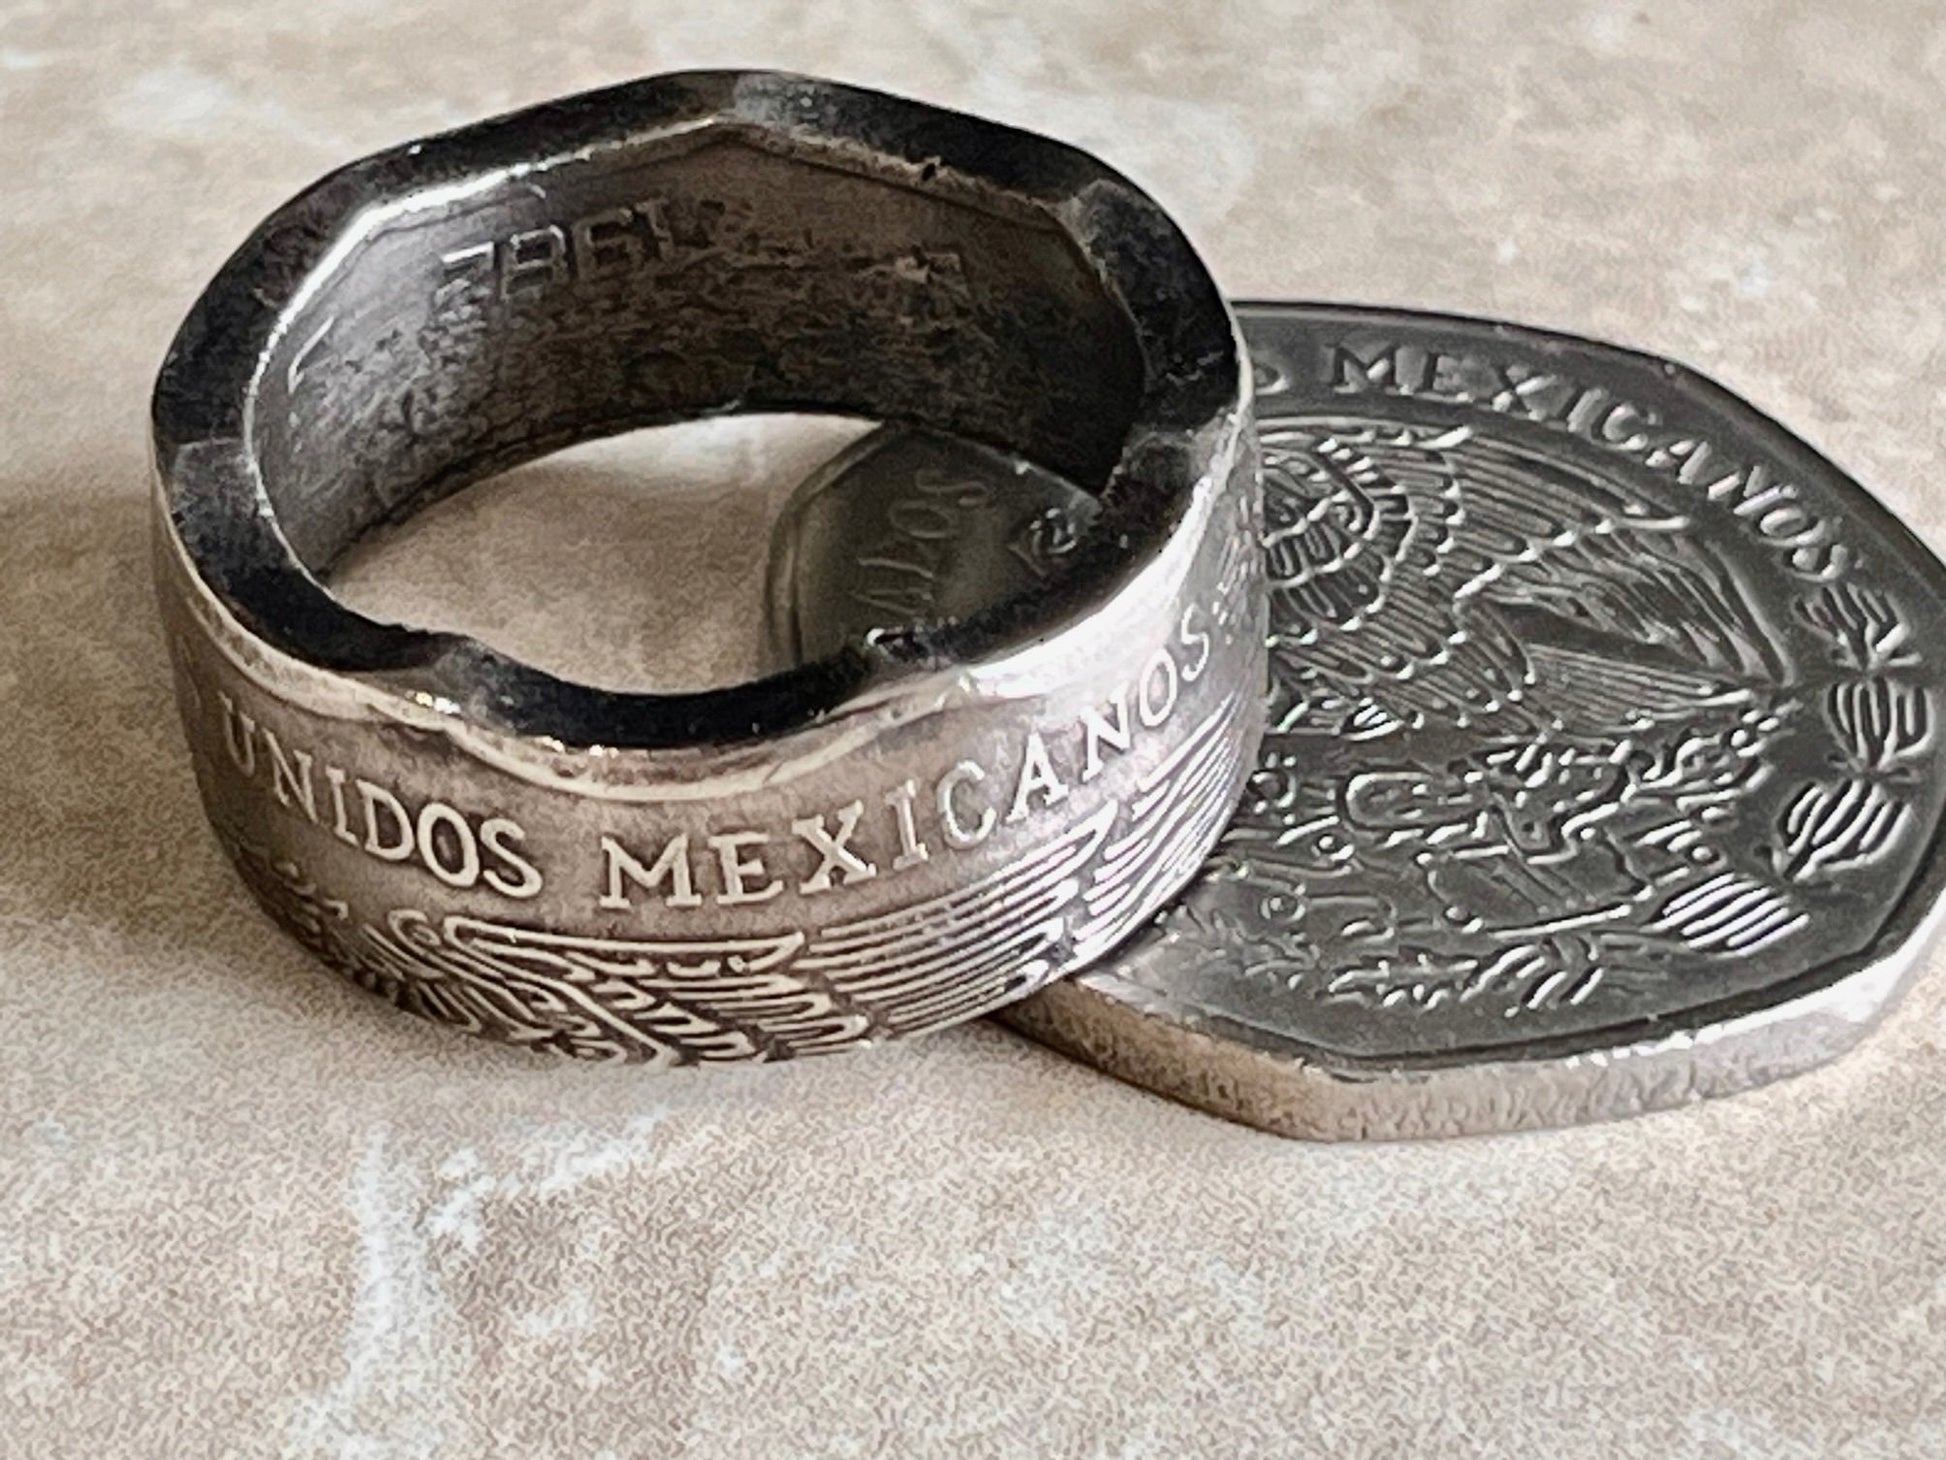 Mexico Ring 10 Peso Mexican Coin Ring Handmade Personal Jewelry Ring Gift For Friend Coin Ring Gift For Him Her World Coin Collector